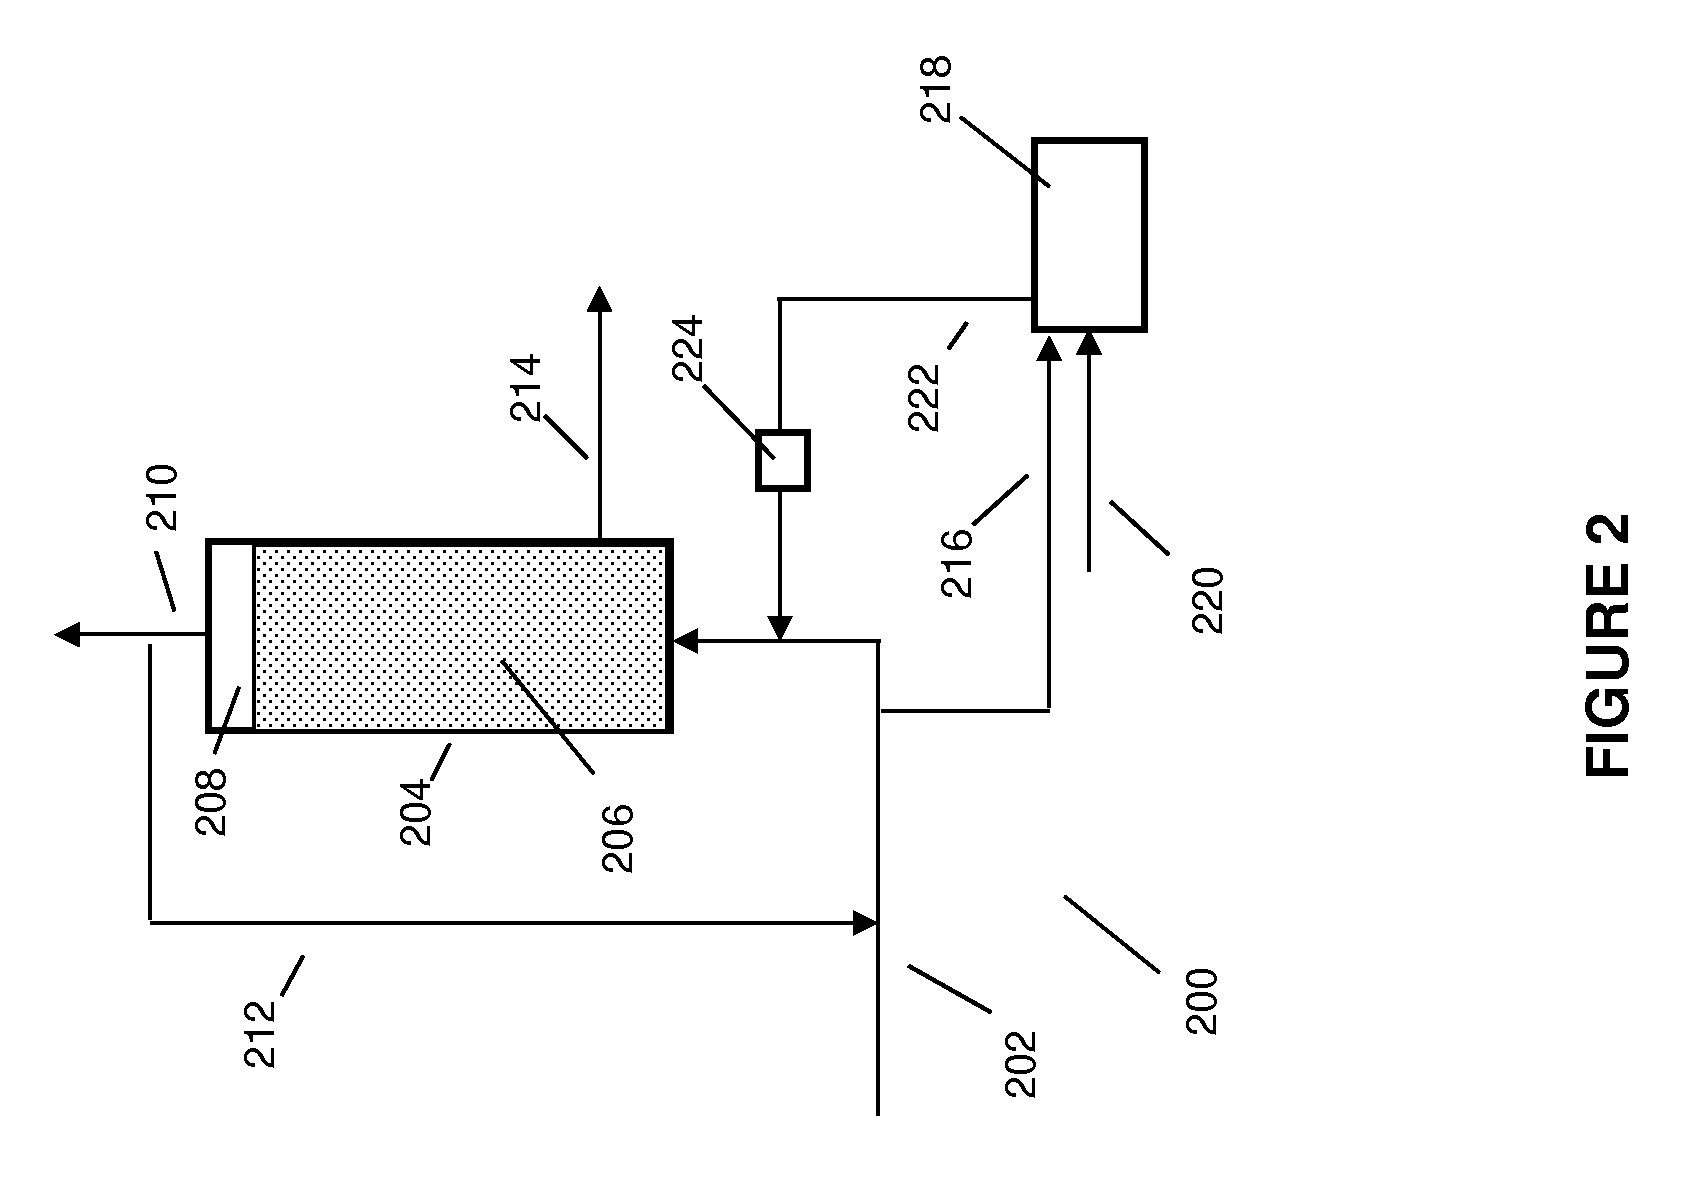 Integrated processes for bioconverting syngas to oxygenated organic compound with sulfur supply